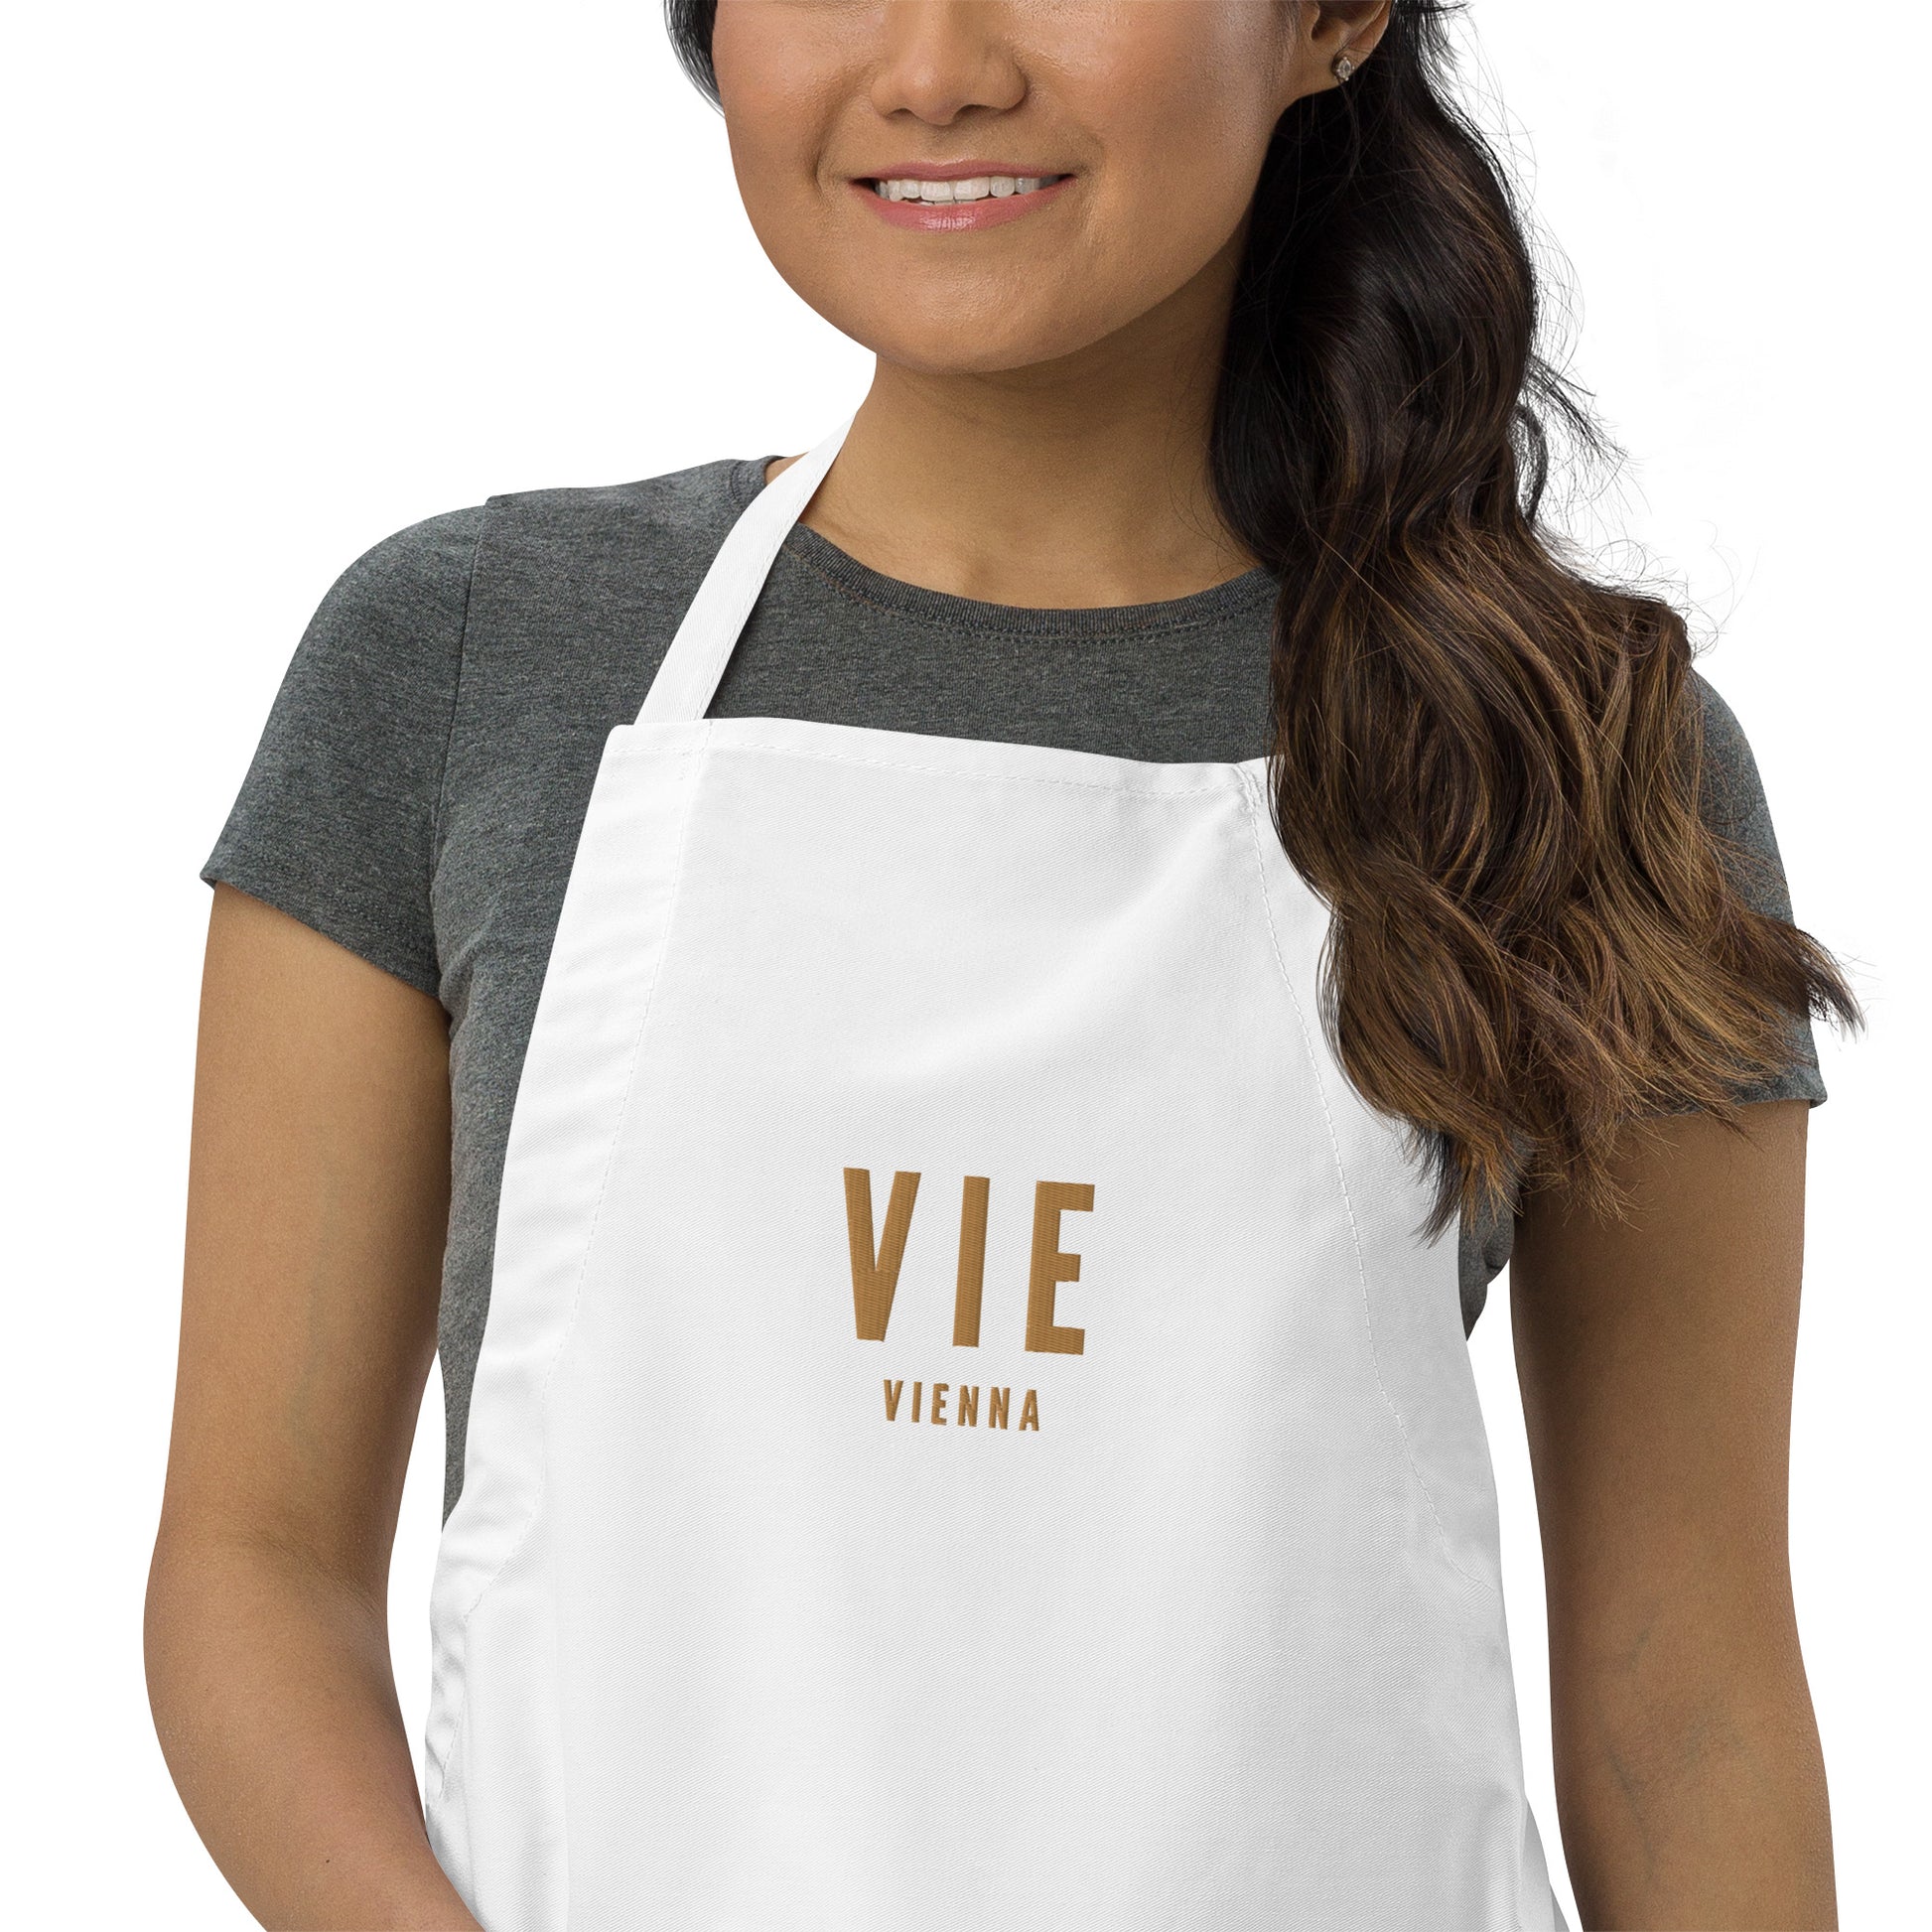 City Embroidered Apron - Old Gold • VIE Vienna • YHM Designs - Image 08